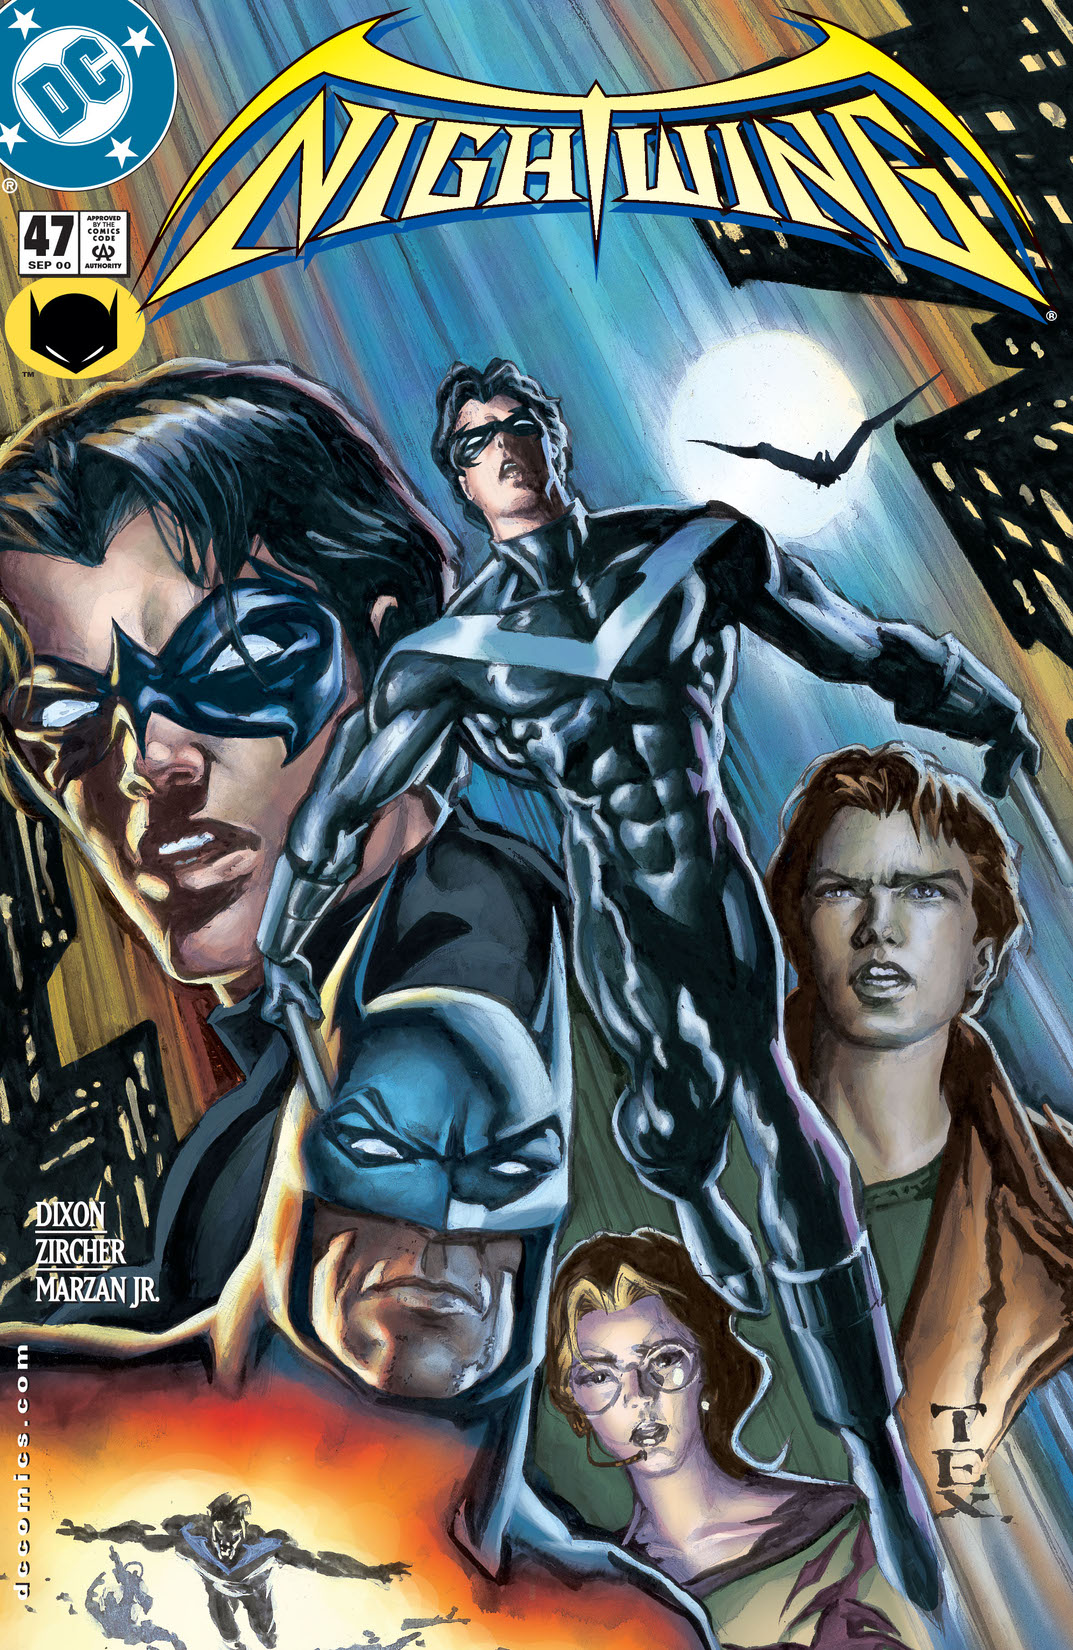 Nightwing (1996-) #47 preview images